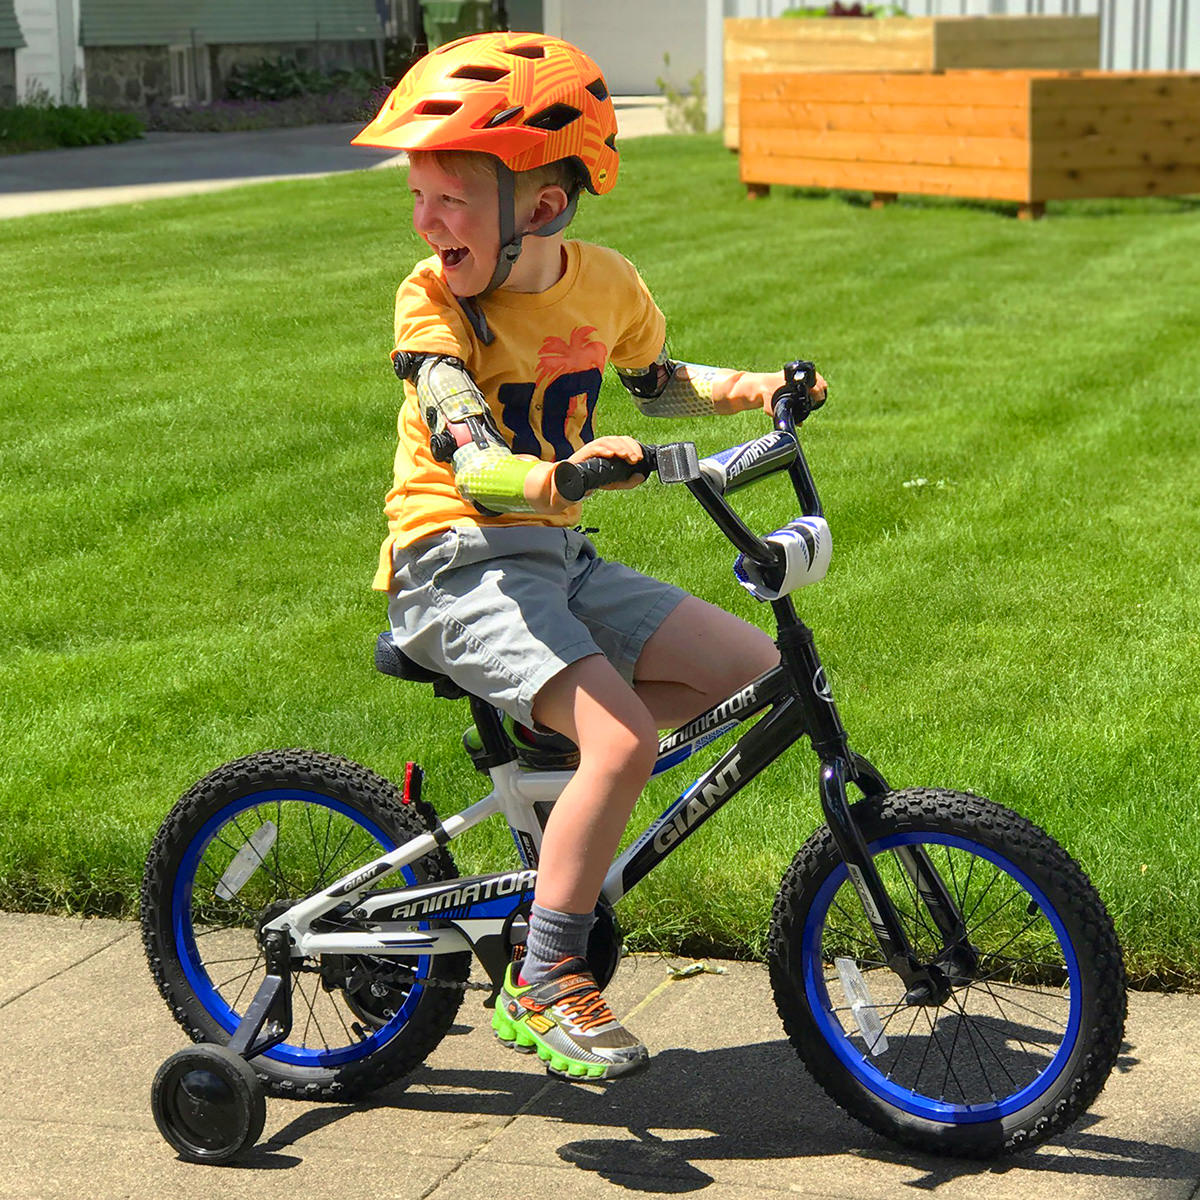 Congenital bilateral pediatric patient Jameson Davis rides his bicycle with his myoelectric prostheses